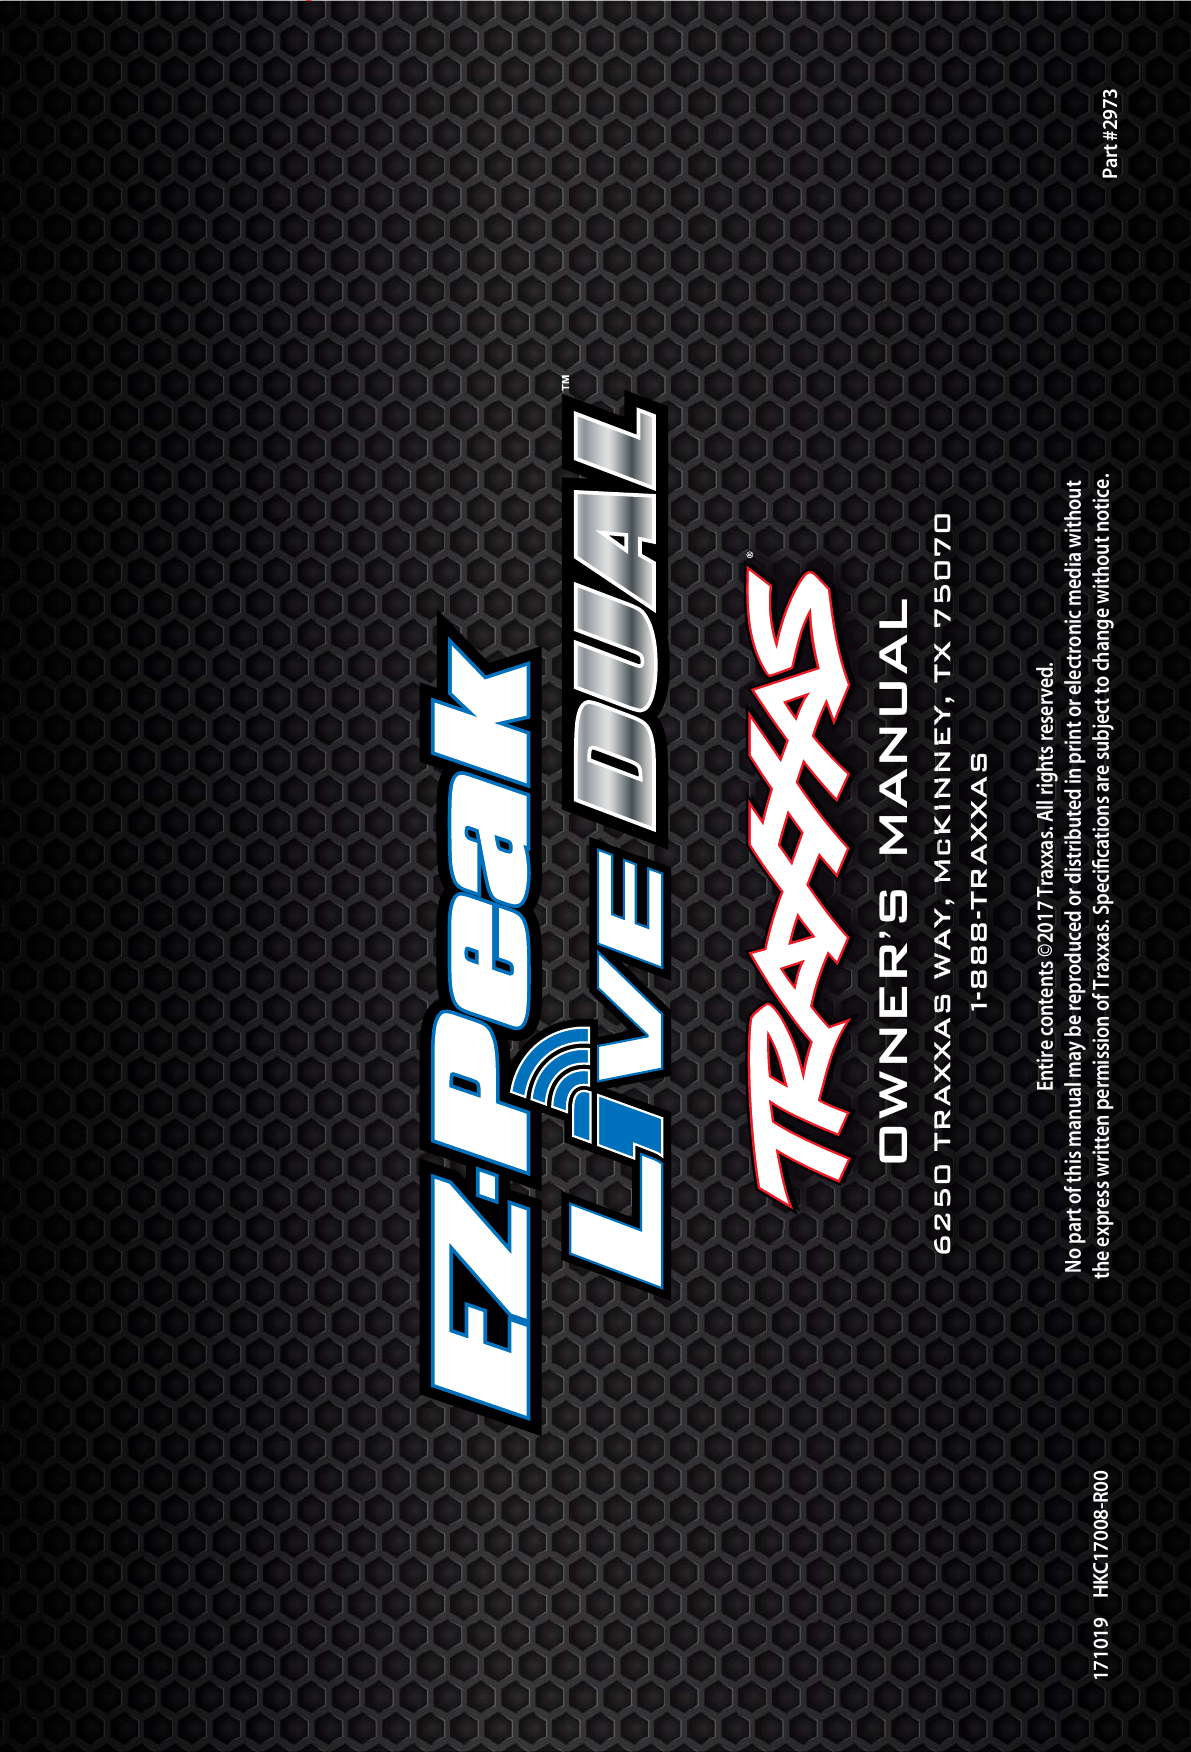 6250 TRAXXAS WAY, McKINNEY, TX 750701-888-TRAXXAS171019     HKC17008-R00  Part #2973owner’s manualEntire contents ©2017 Traxxas. All rights reserved. No part of this manual may be reproduced or distributed in print or electronic media without the express written permission of Traxxas. Speciﬁcations are subject to change without notice. 